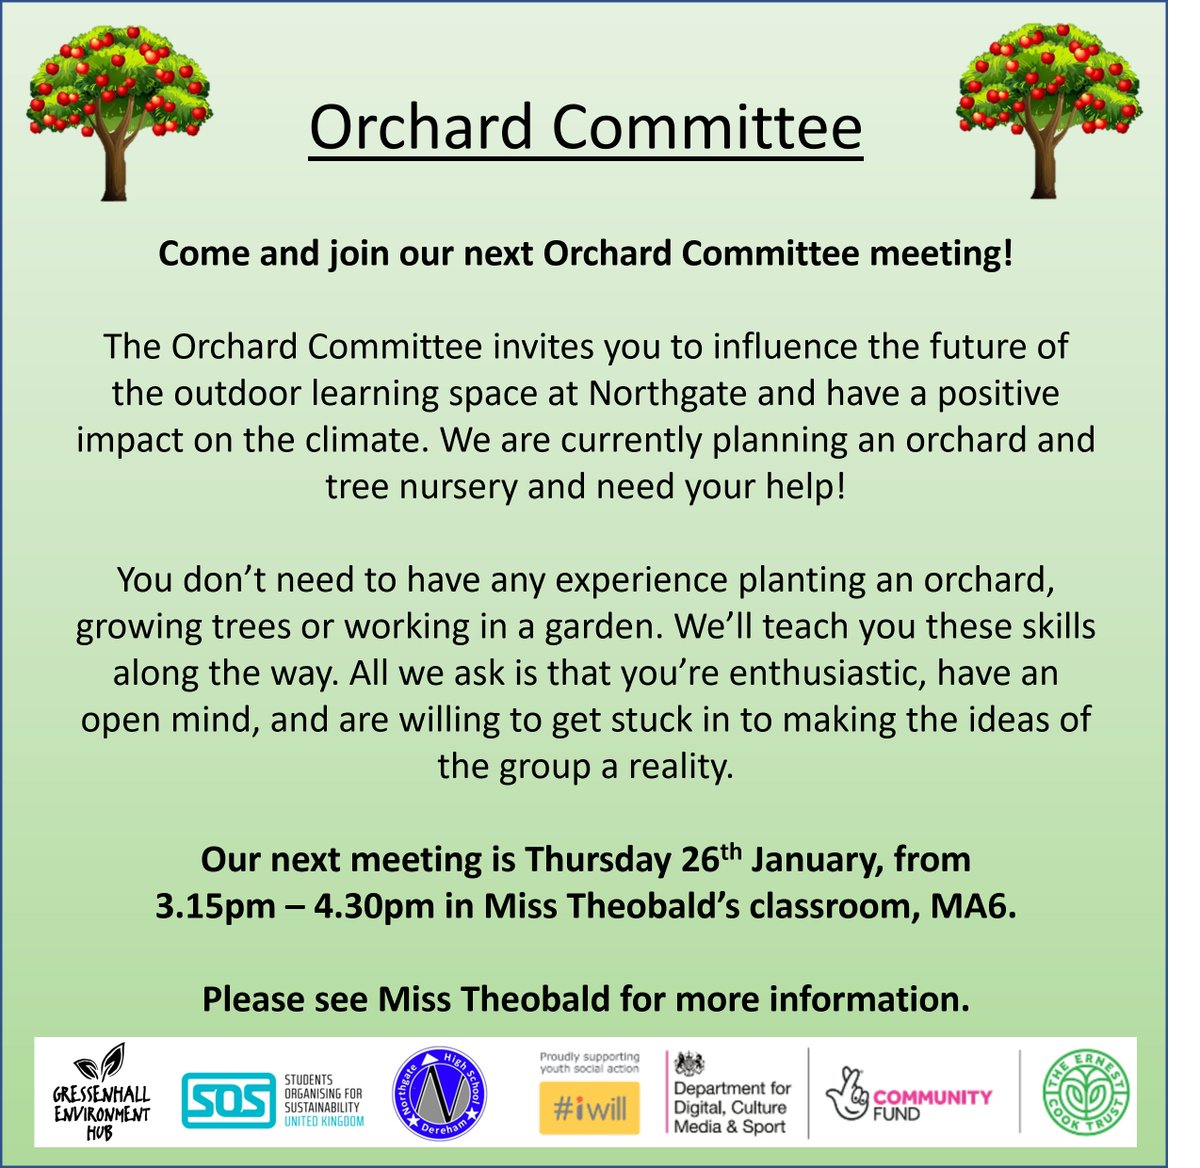 Our next Orchard Committee meeting is on Thursday 26th January after school until 4.30pm in MA6. We welcome new and existing members to the group – come along and get involved in creating an #orchard and #treenursery in our outdoor learning space.
#getinvolved #volunteersneeded